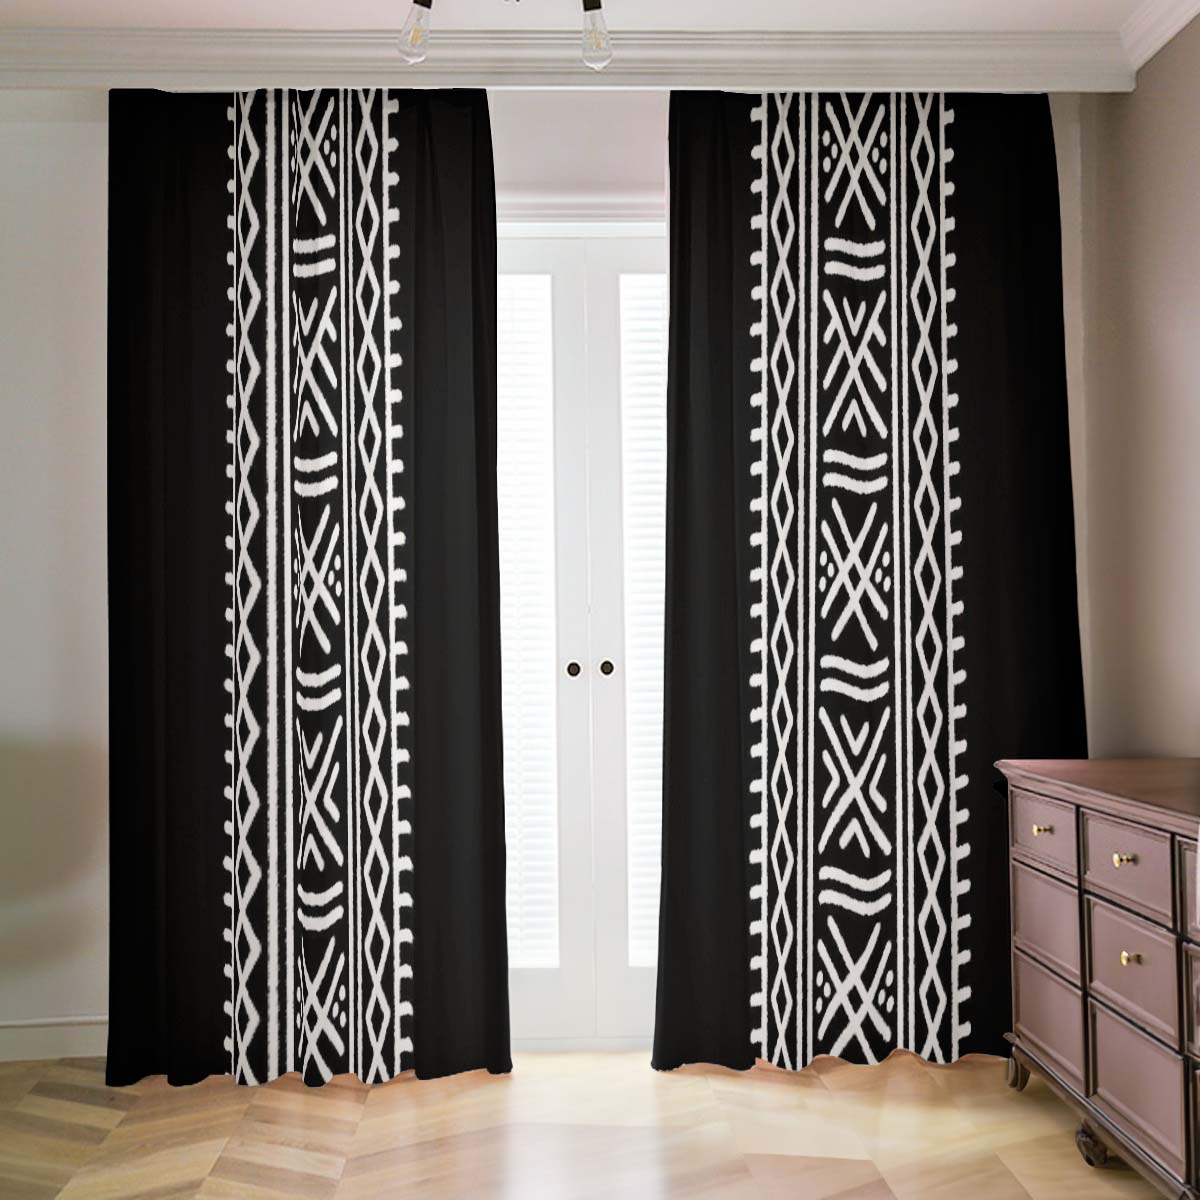 African Curtains in Blackout Tribal Print Black & White